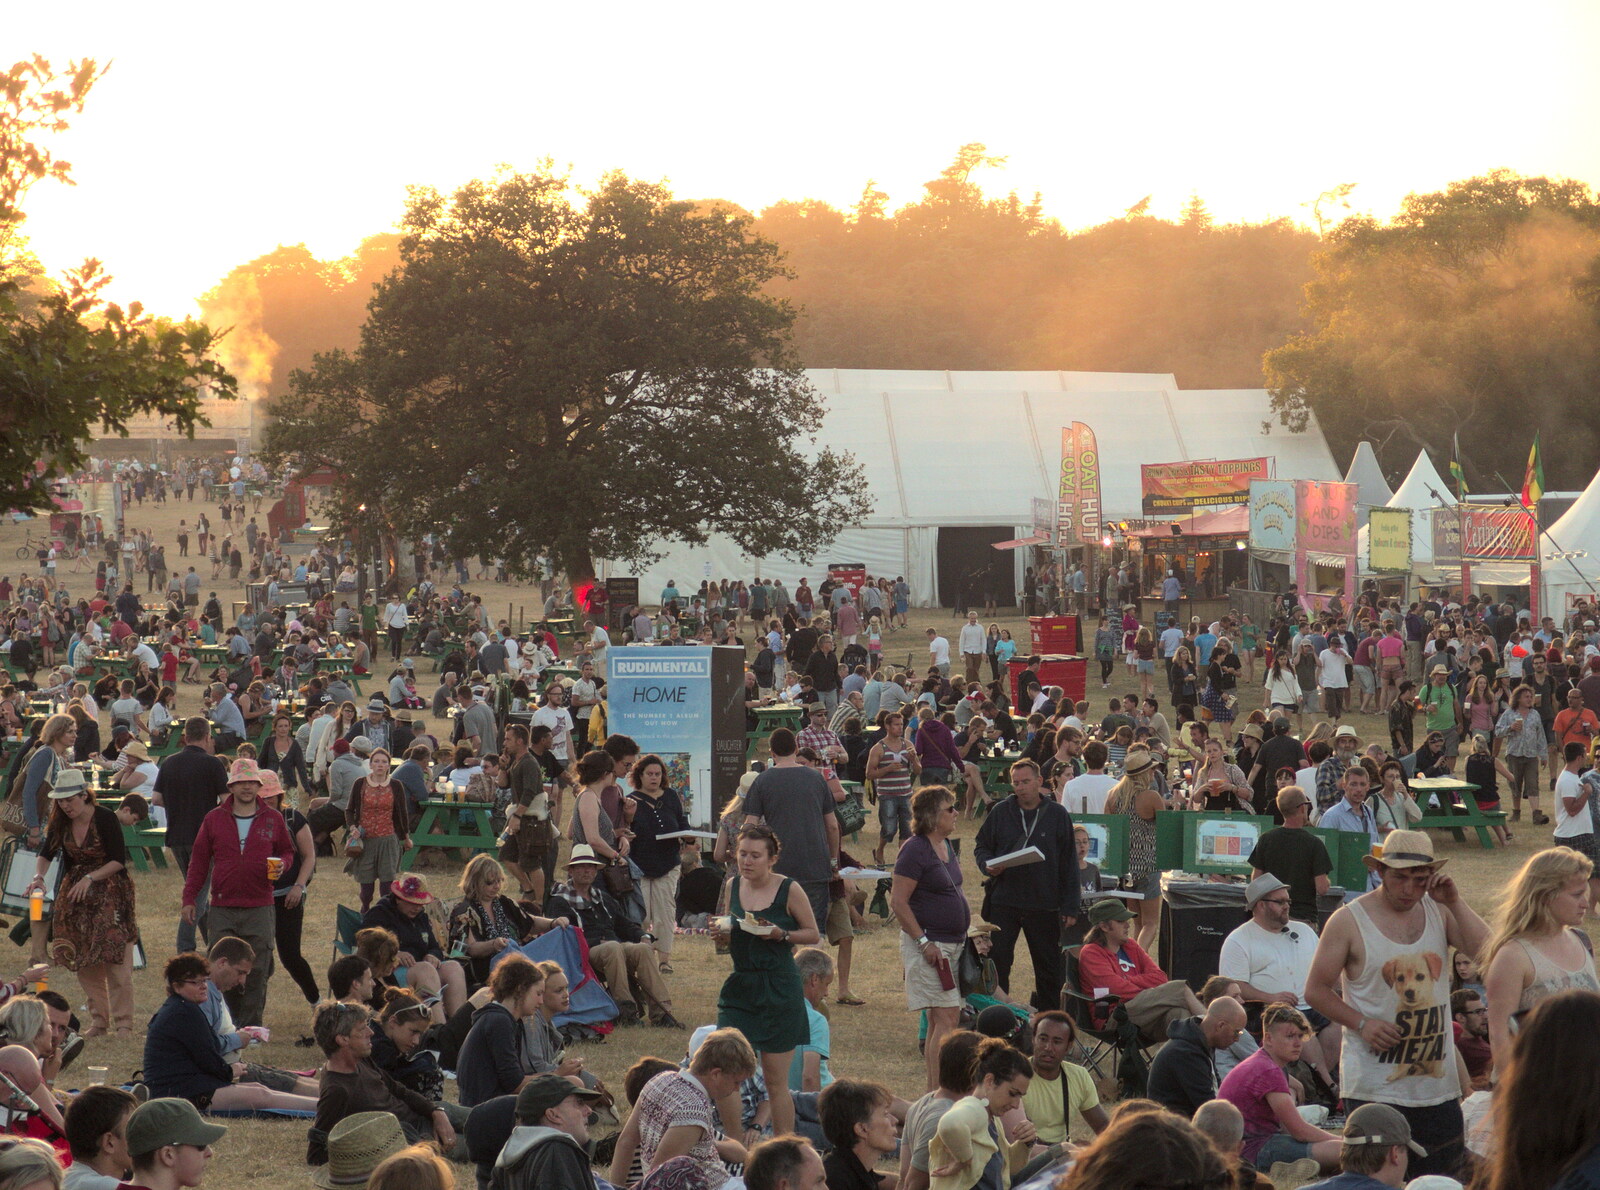 Crowds in the low sun from The 8th Latitude Festival, Henham Park, Southwold, Suffolk - 18th July 2013